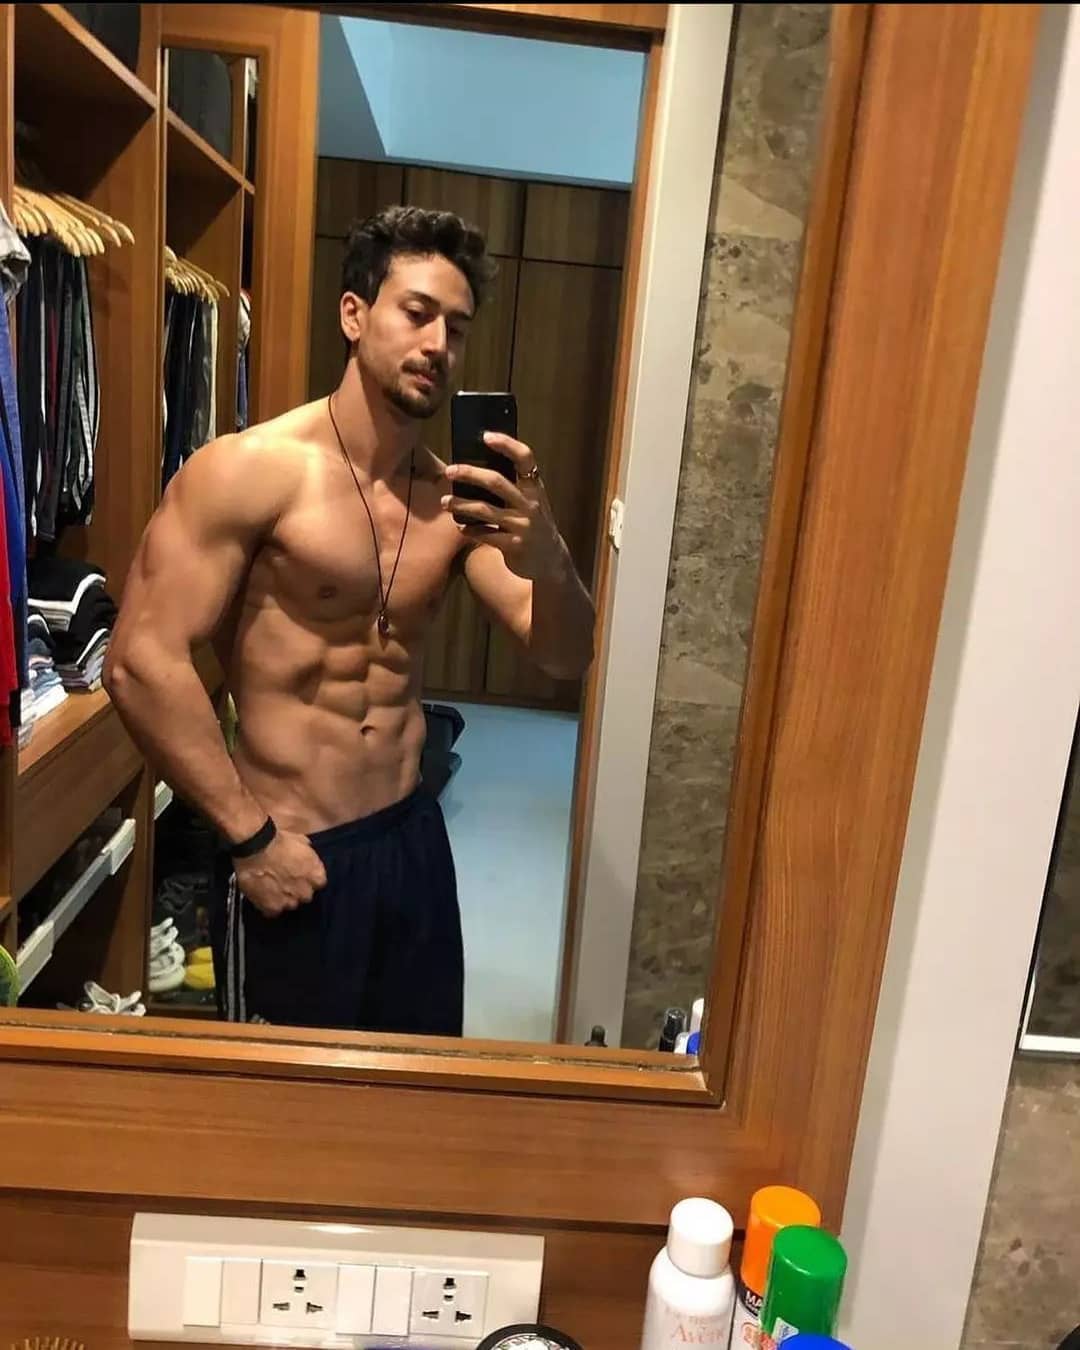 Tiger Shroff Ki Bp Xxx Video - Shirtless Bollywood Men: Sexy Snaps of Tiger Shroff - the shot of Tiger in  his underwear is that real?